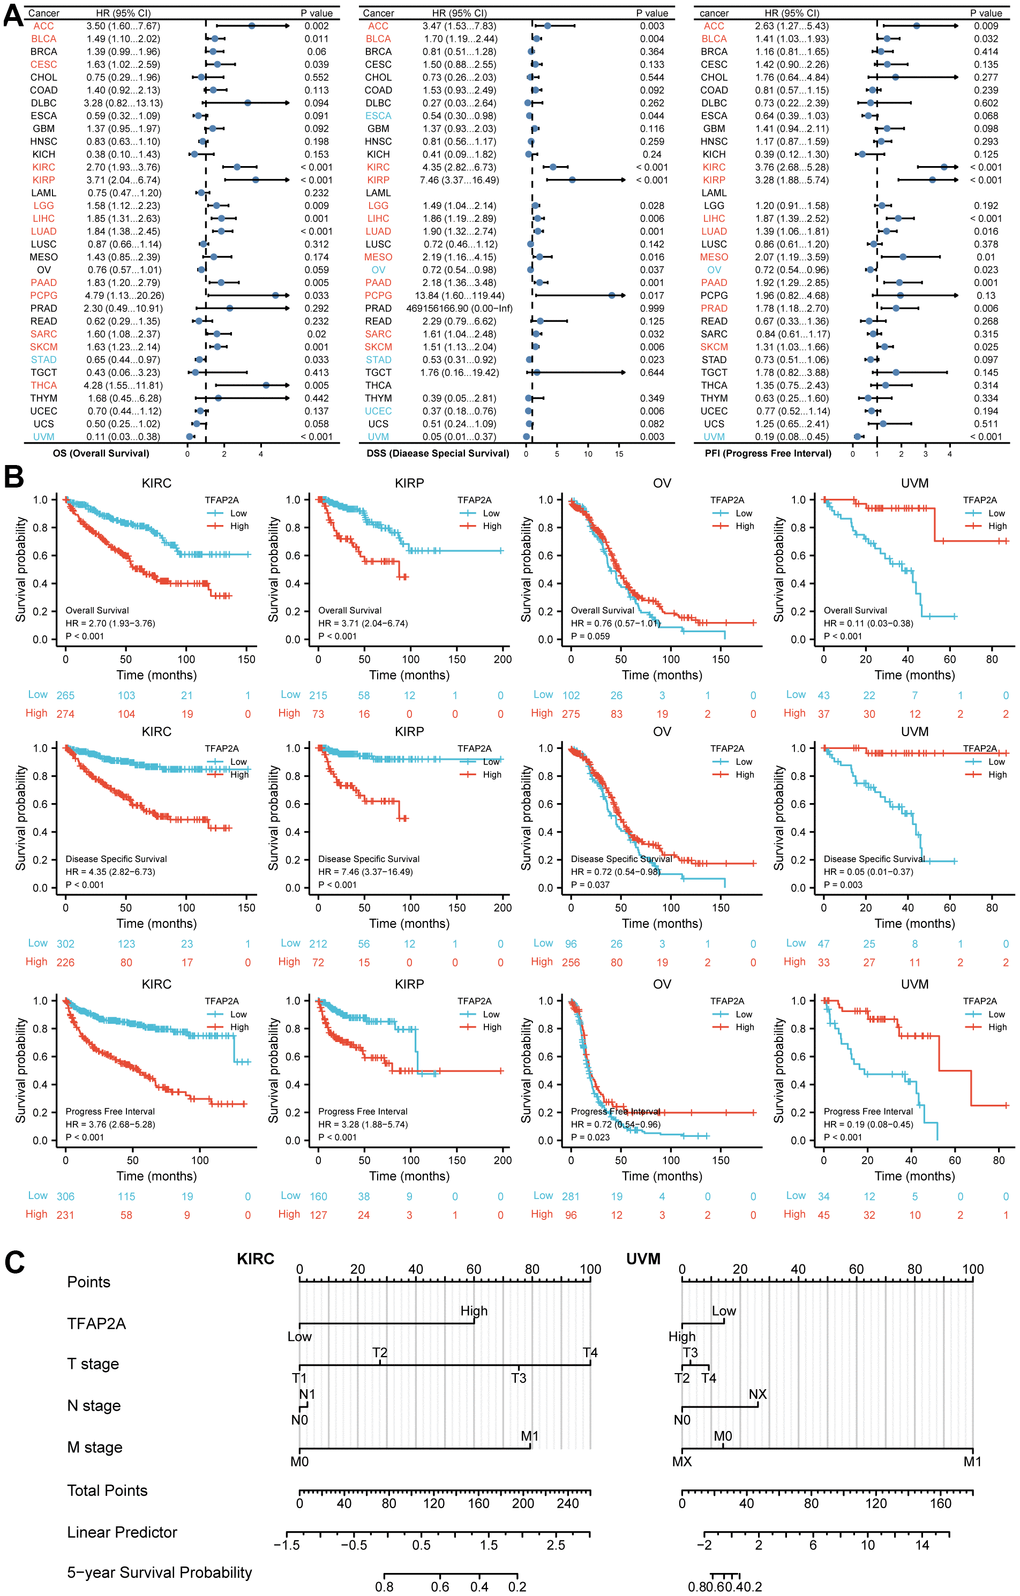 Prognosis analysis of TFAP2A in different cancer types. (A) Correlation between TFAP2A expression and OS, DSS, PFI analyzed by Cox regression respectively. HR > 1 represents high-risk cancer type and HR B) Kaplan-Meier survival curve of KIRC, KIRP, OV, UVM with high and low TFAP2A expression. (C) Nomogram predicting 5-year survival probability for KIRC and UVM.